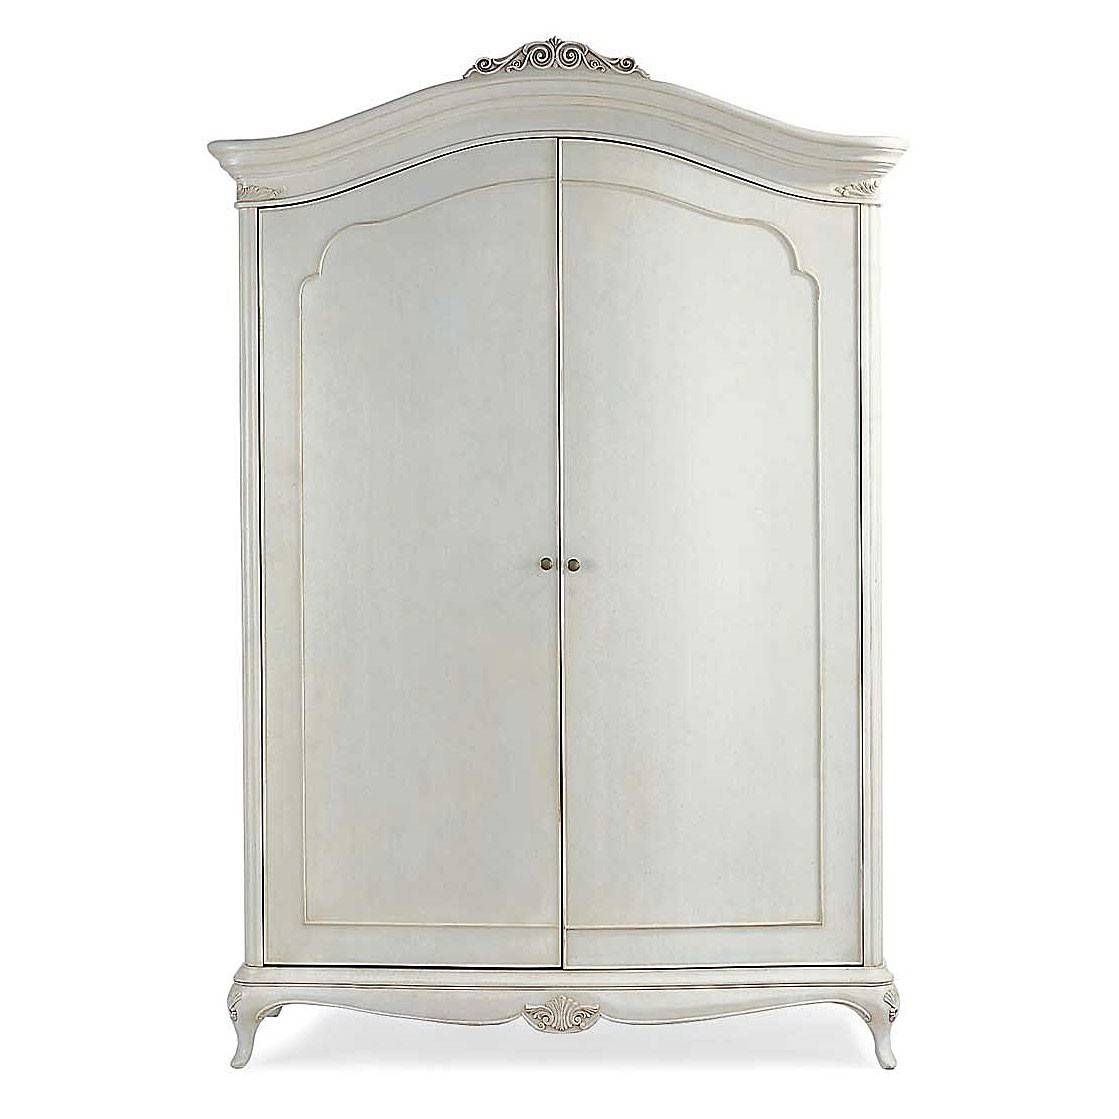 Ivory French Inspired Wide Fitted Wardrobe | French Bedroom With Regard To French White Wardrobes (View 2 of 15)